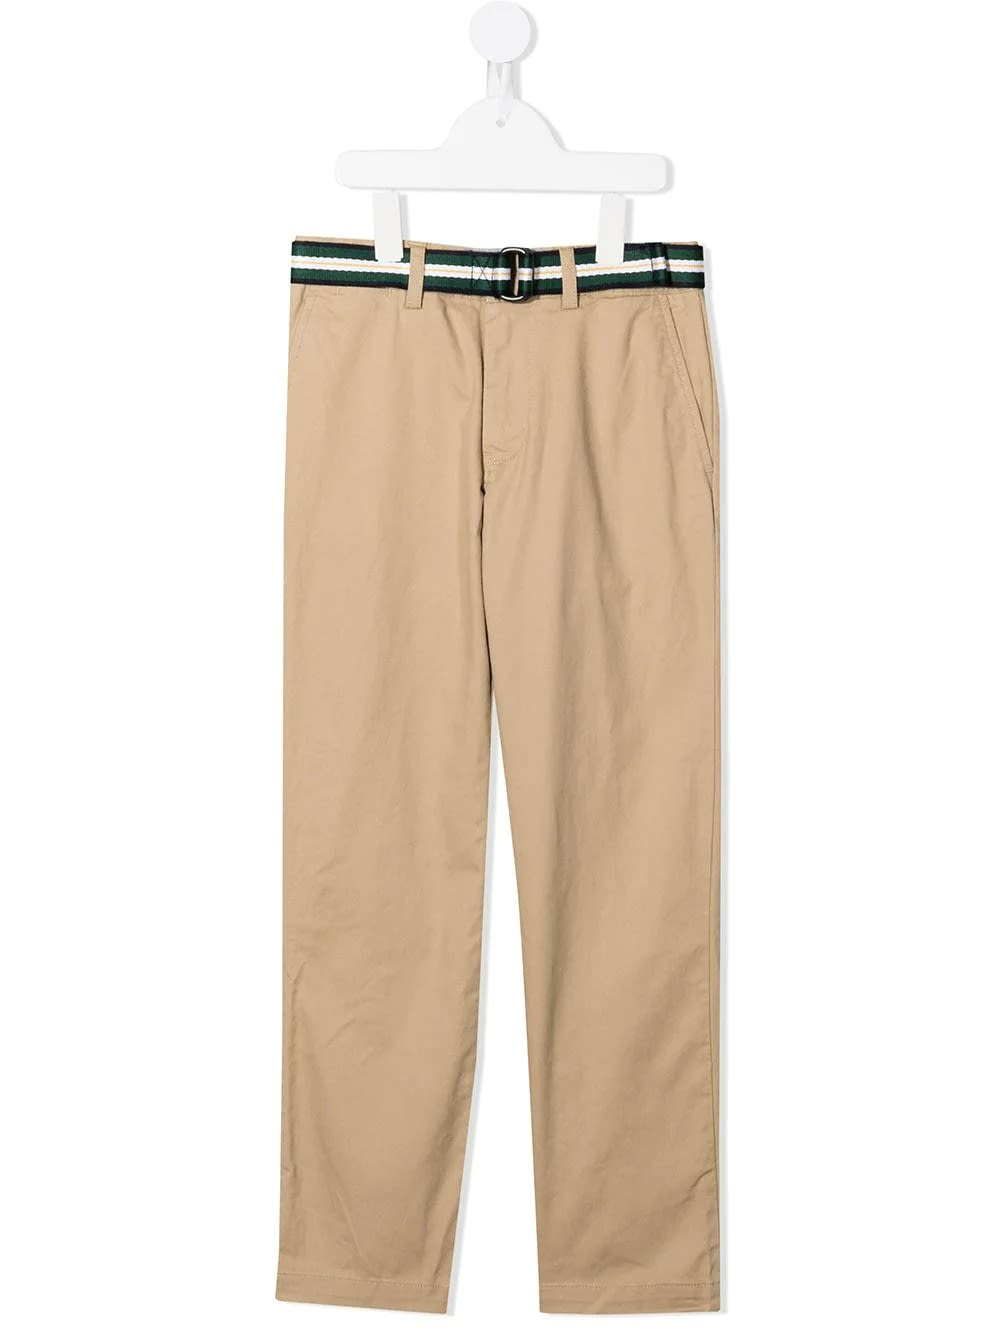 Ralph Lauren Teen Trousers In Classic Khaki Stretch Chino With Belt